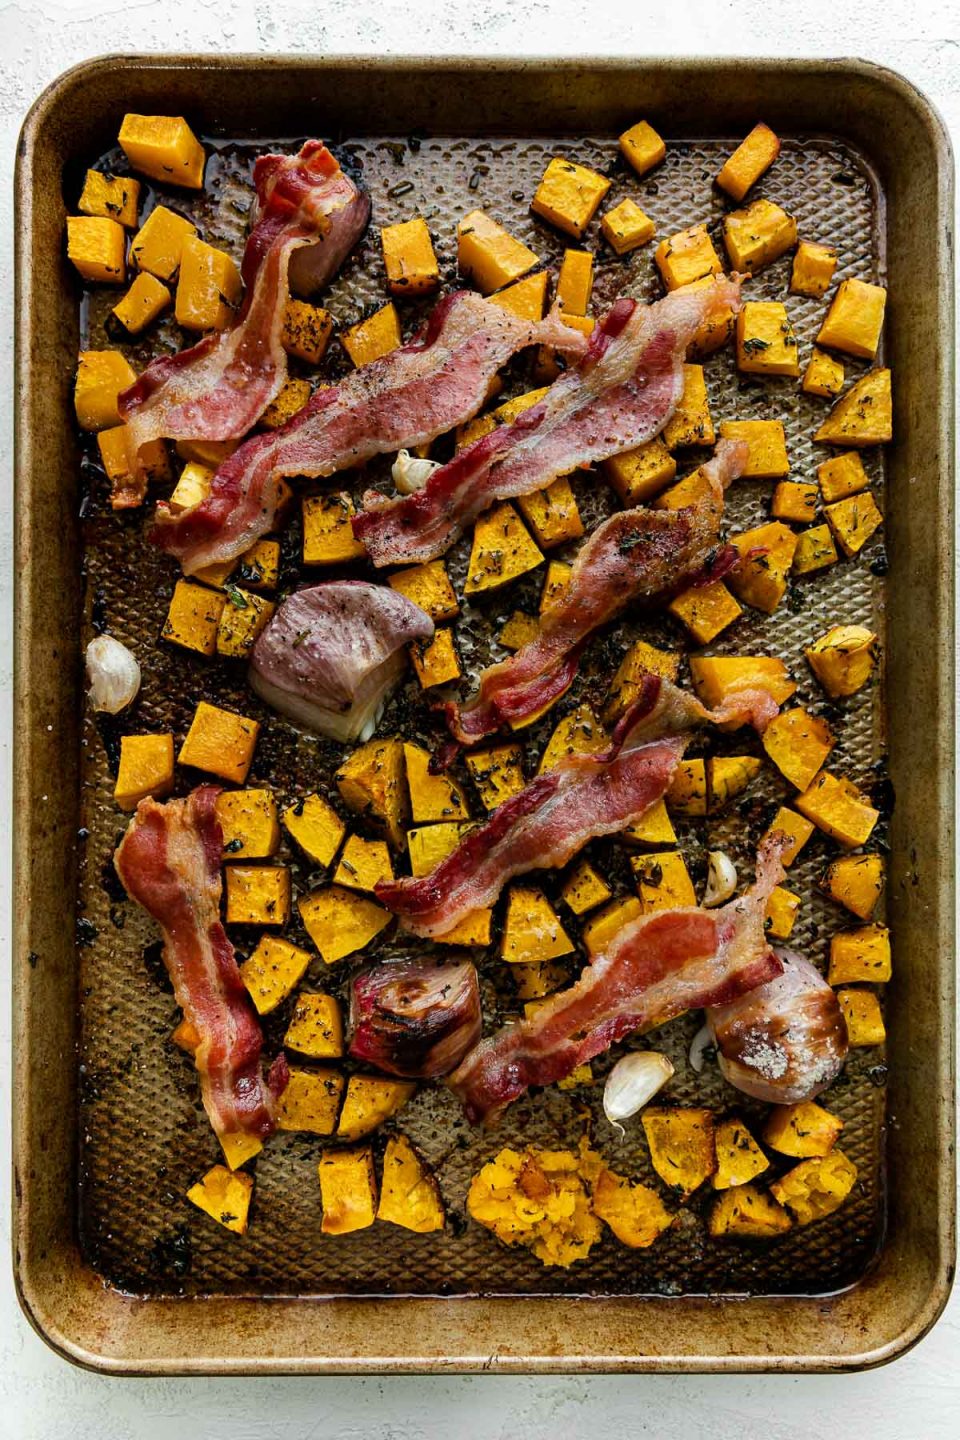 Cubed butternut squash, shallots, & garlic seasoned with olive oil & fresh herbs with bacon draped over top on a baking sheet after roasting. The baking sheet sits atop a white textured surface.